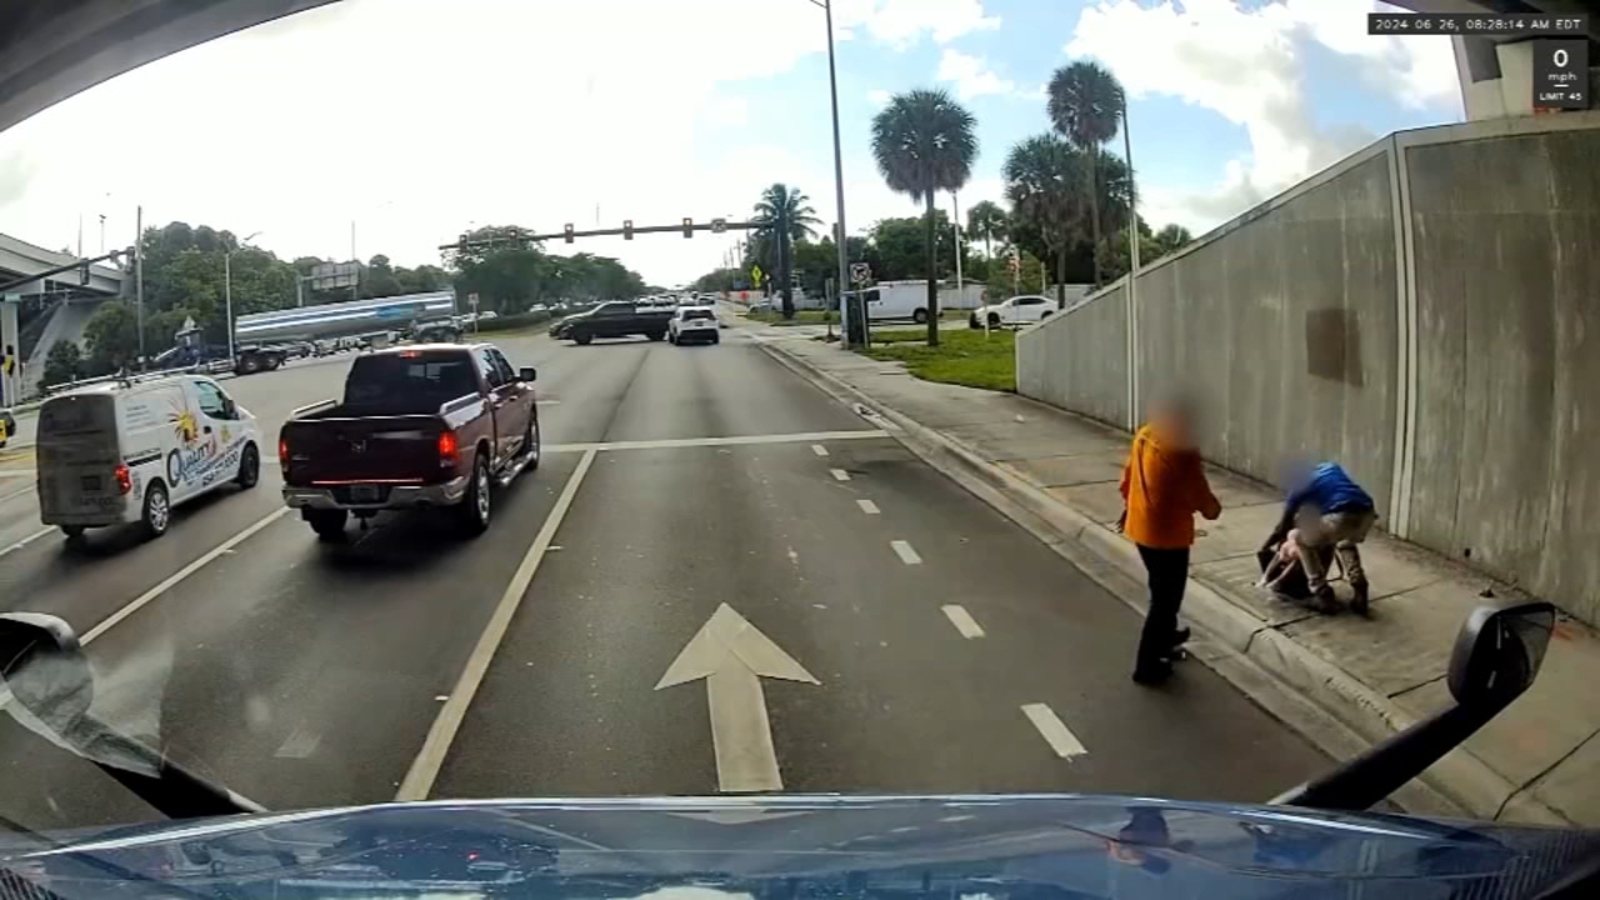 Bystanders run to help toddler ditched by carjacker in Florida: VIDEO